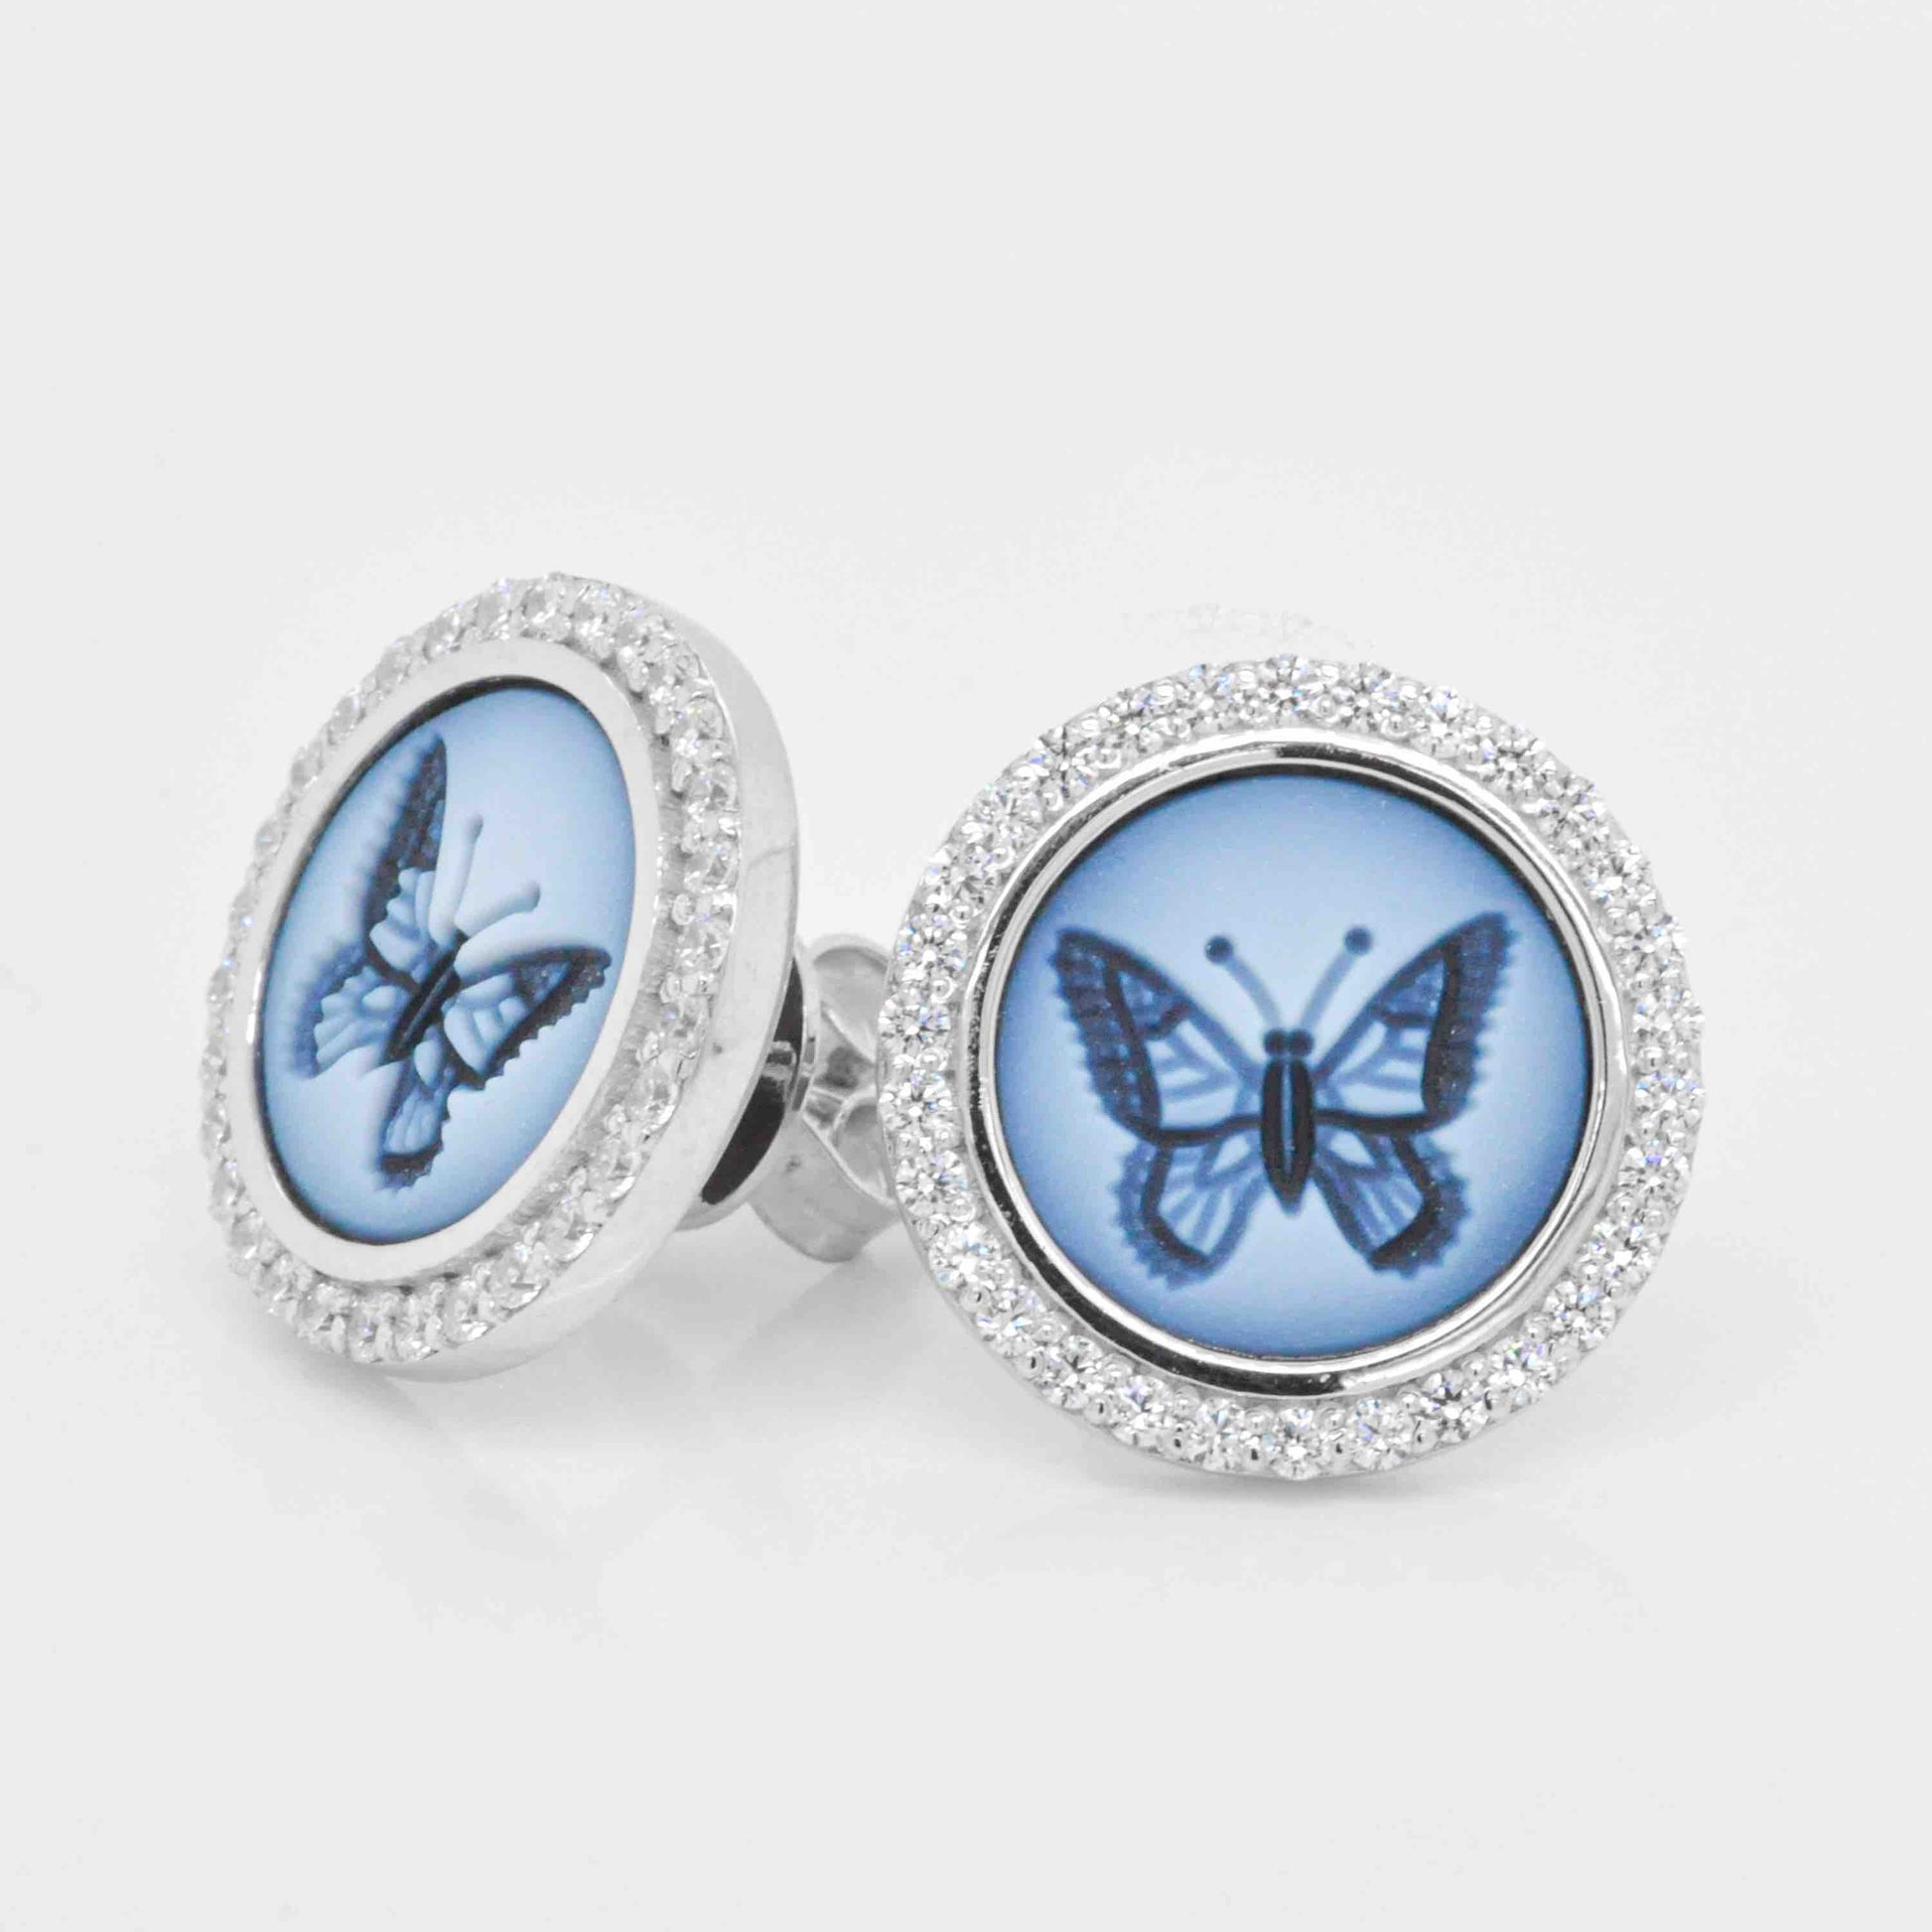 18K Gold Natural Agate Butterfly Intaglio Diamond earrings - Vaibhav Dhadda Jewelry